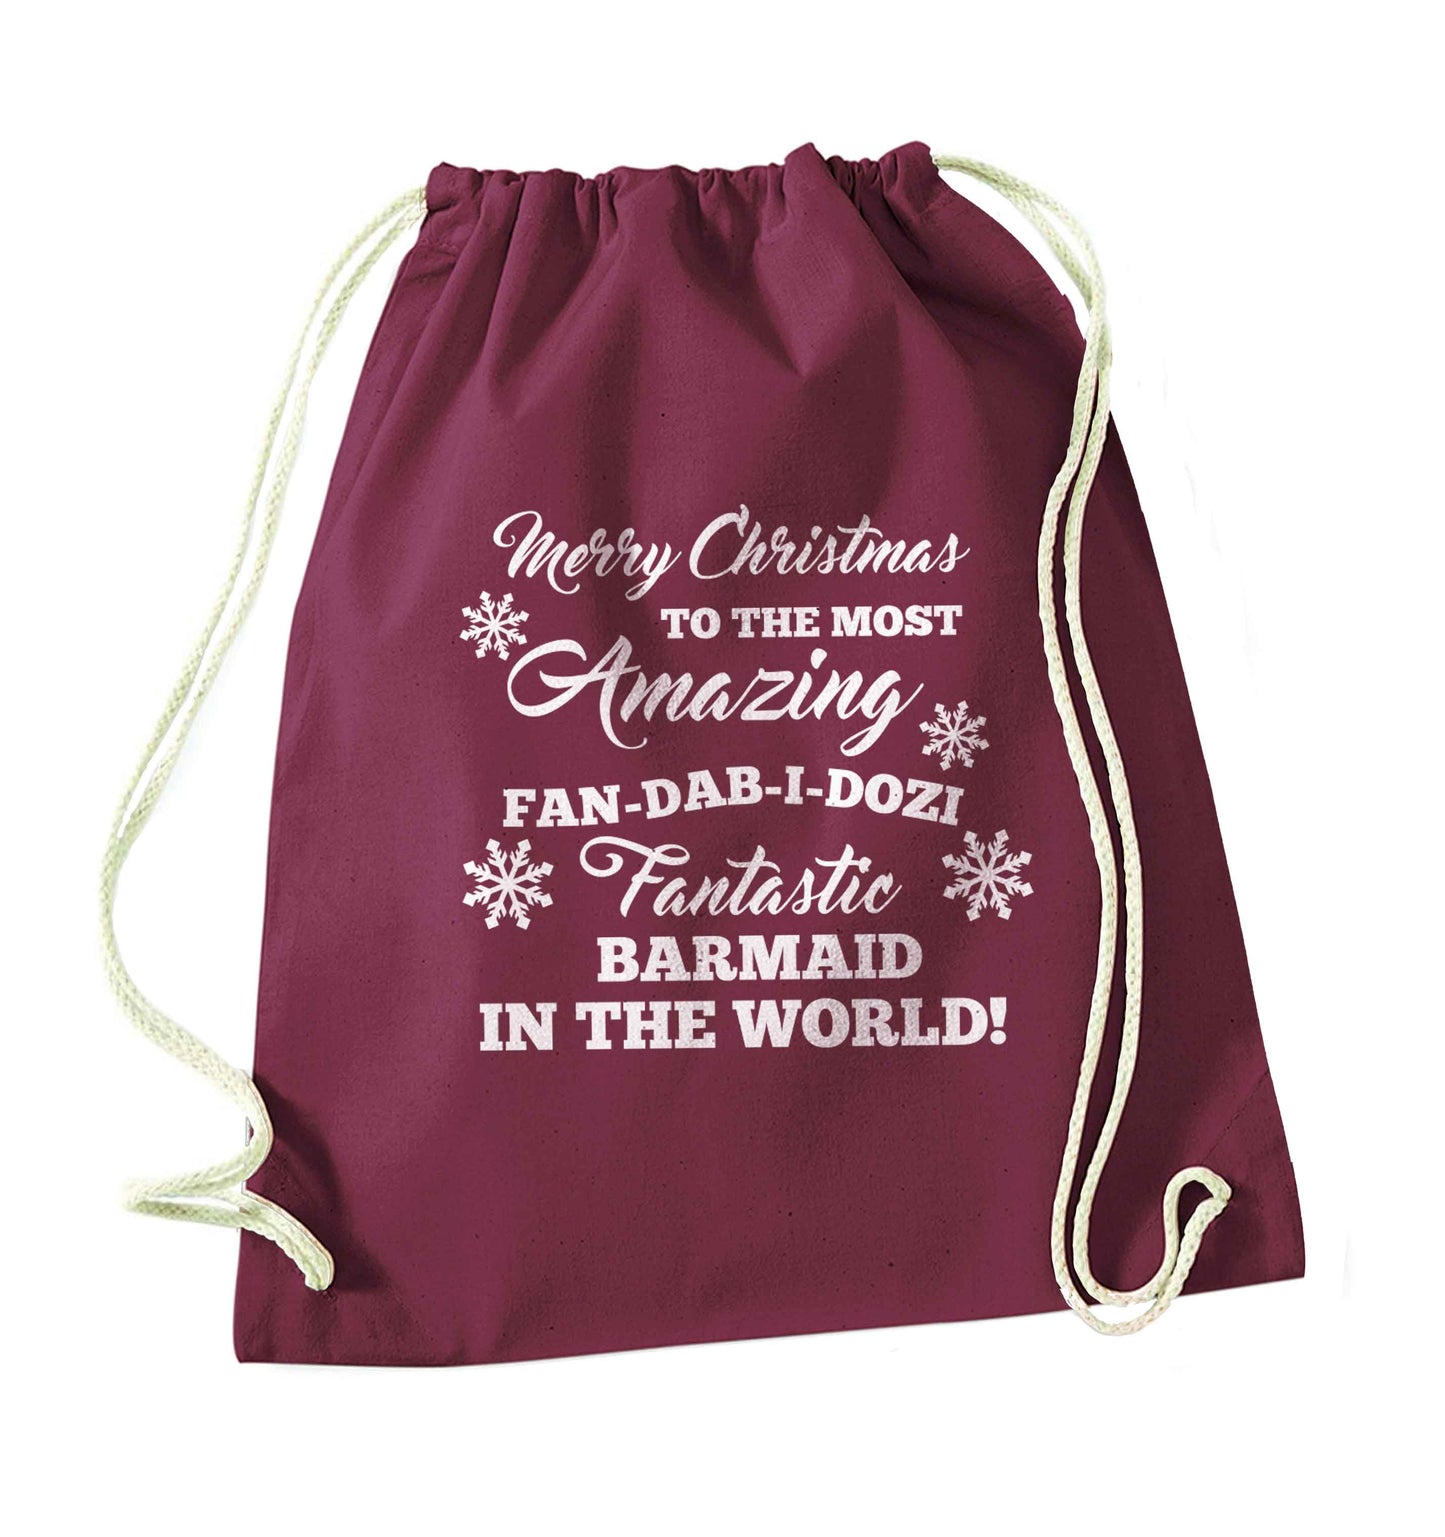 Merry Christmas to the most amazing barmaid in the world! maroon drawstring bag